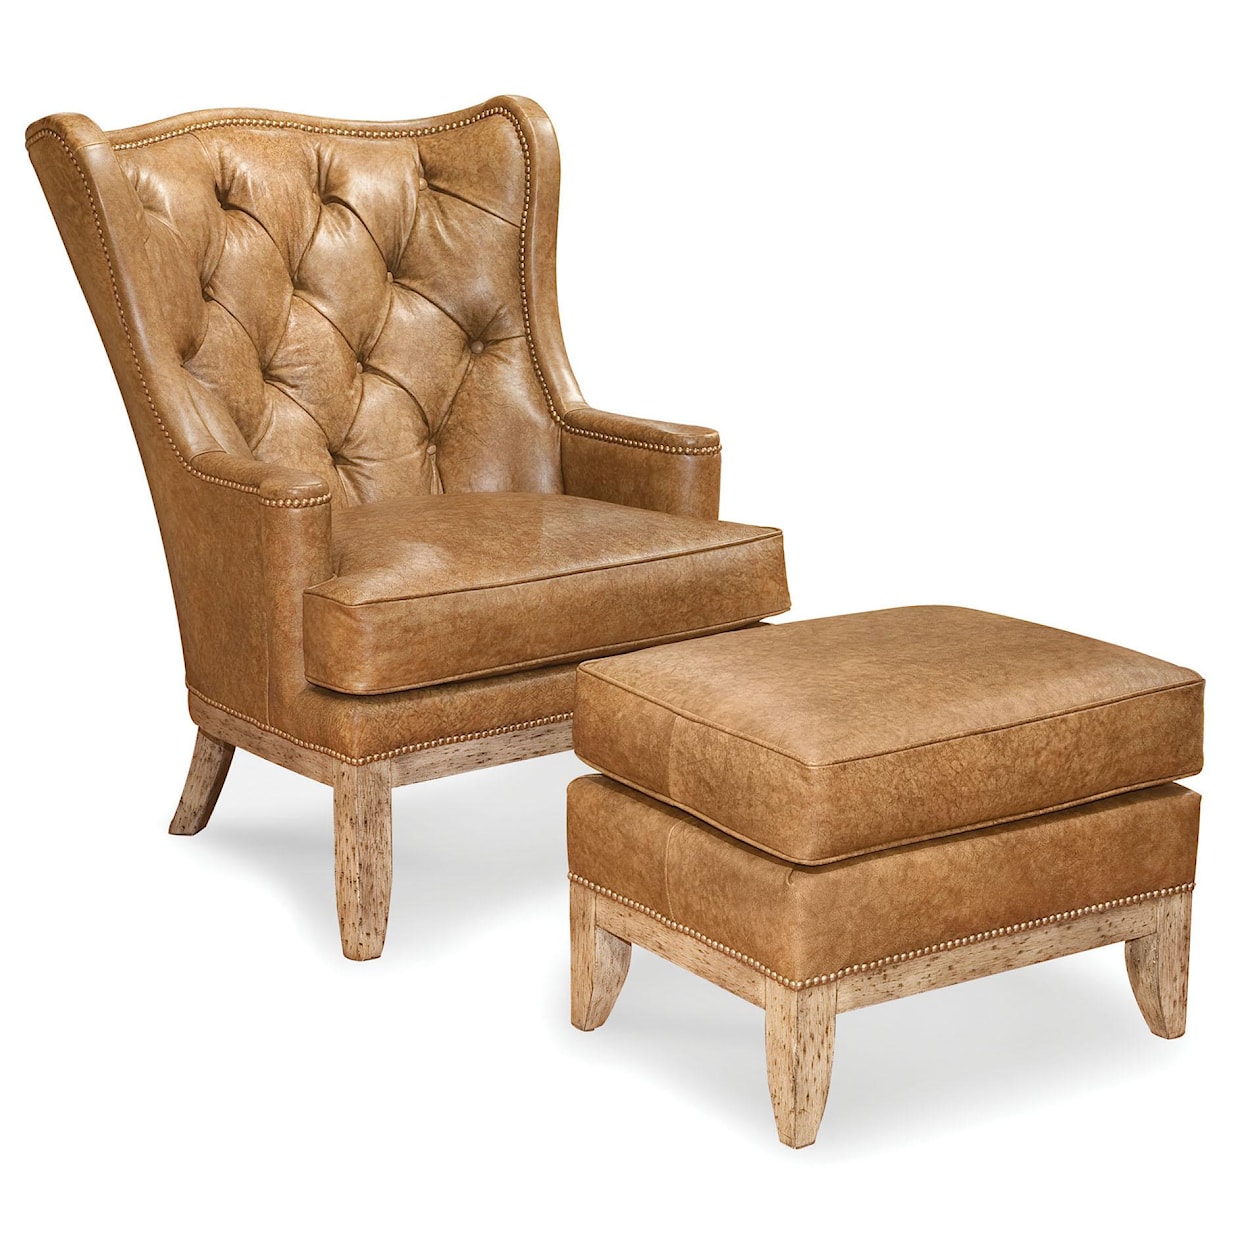 Fairfield Chairs Upholstered Wing Chair